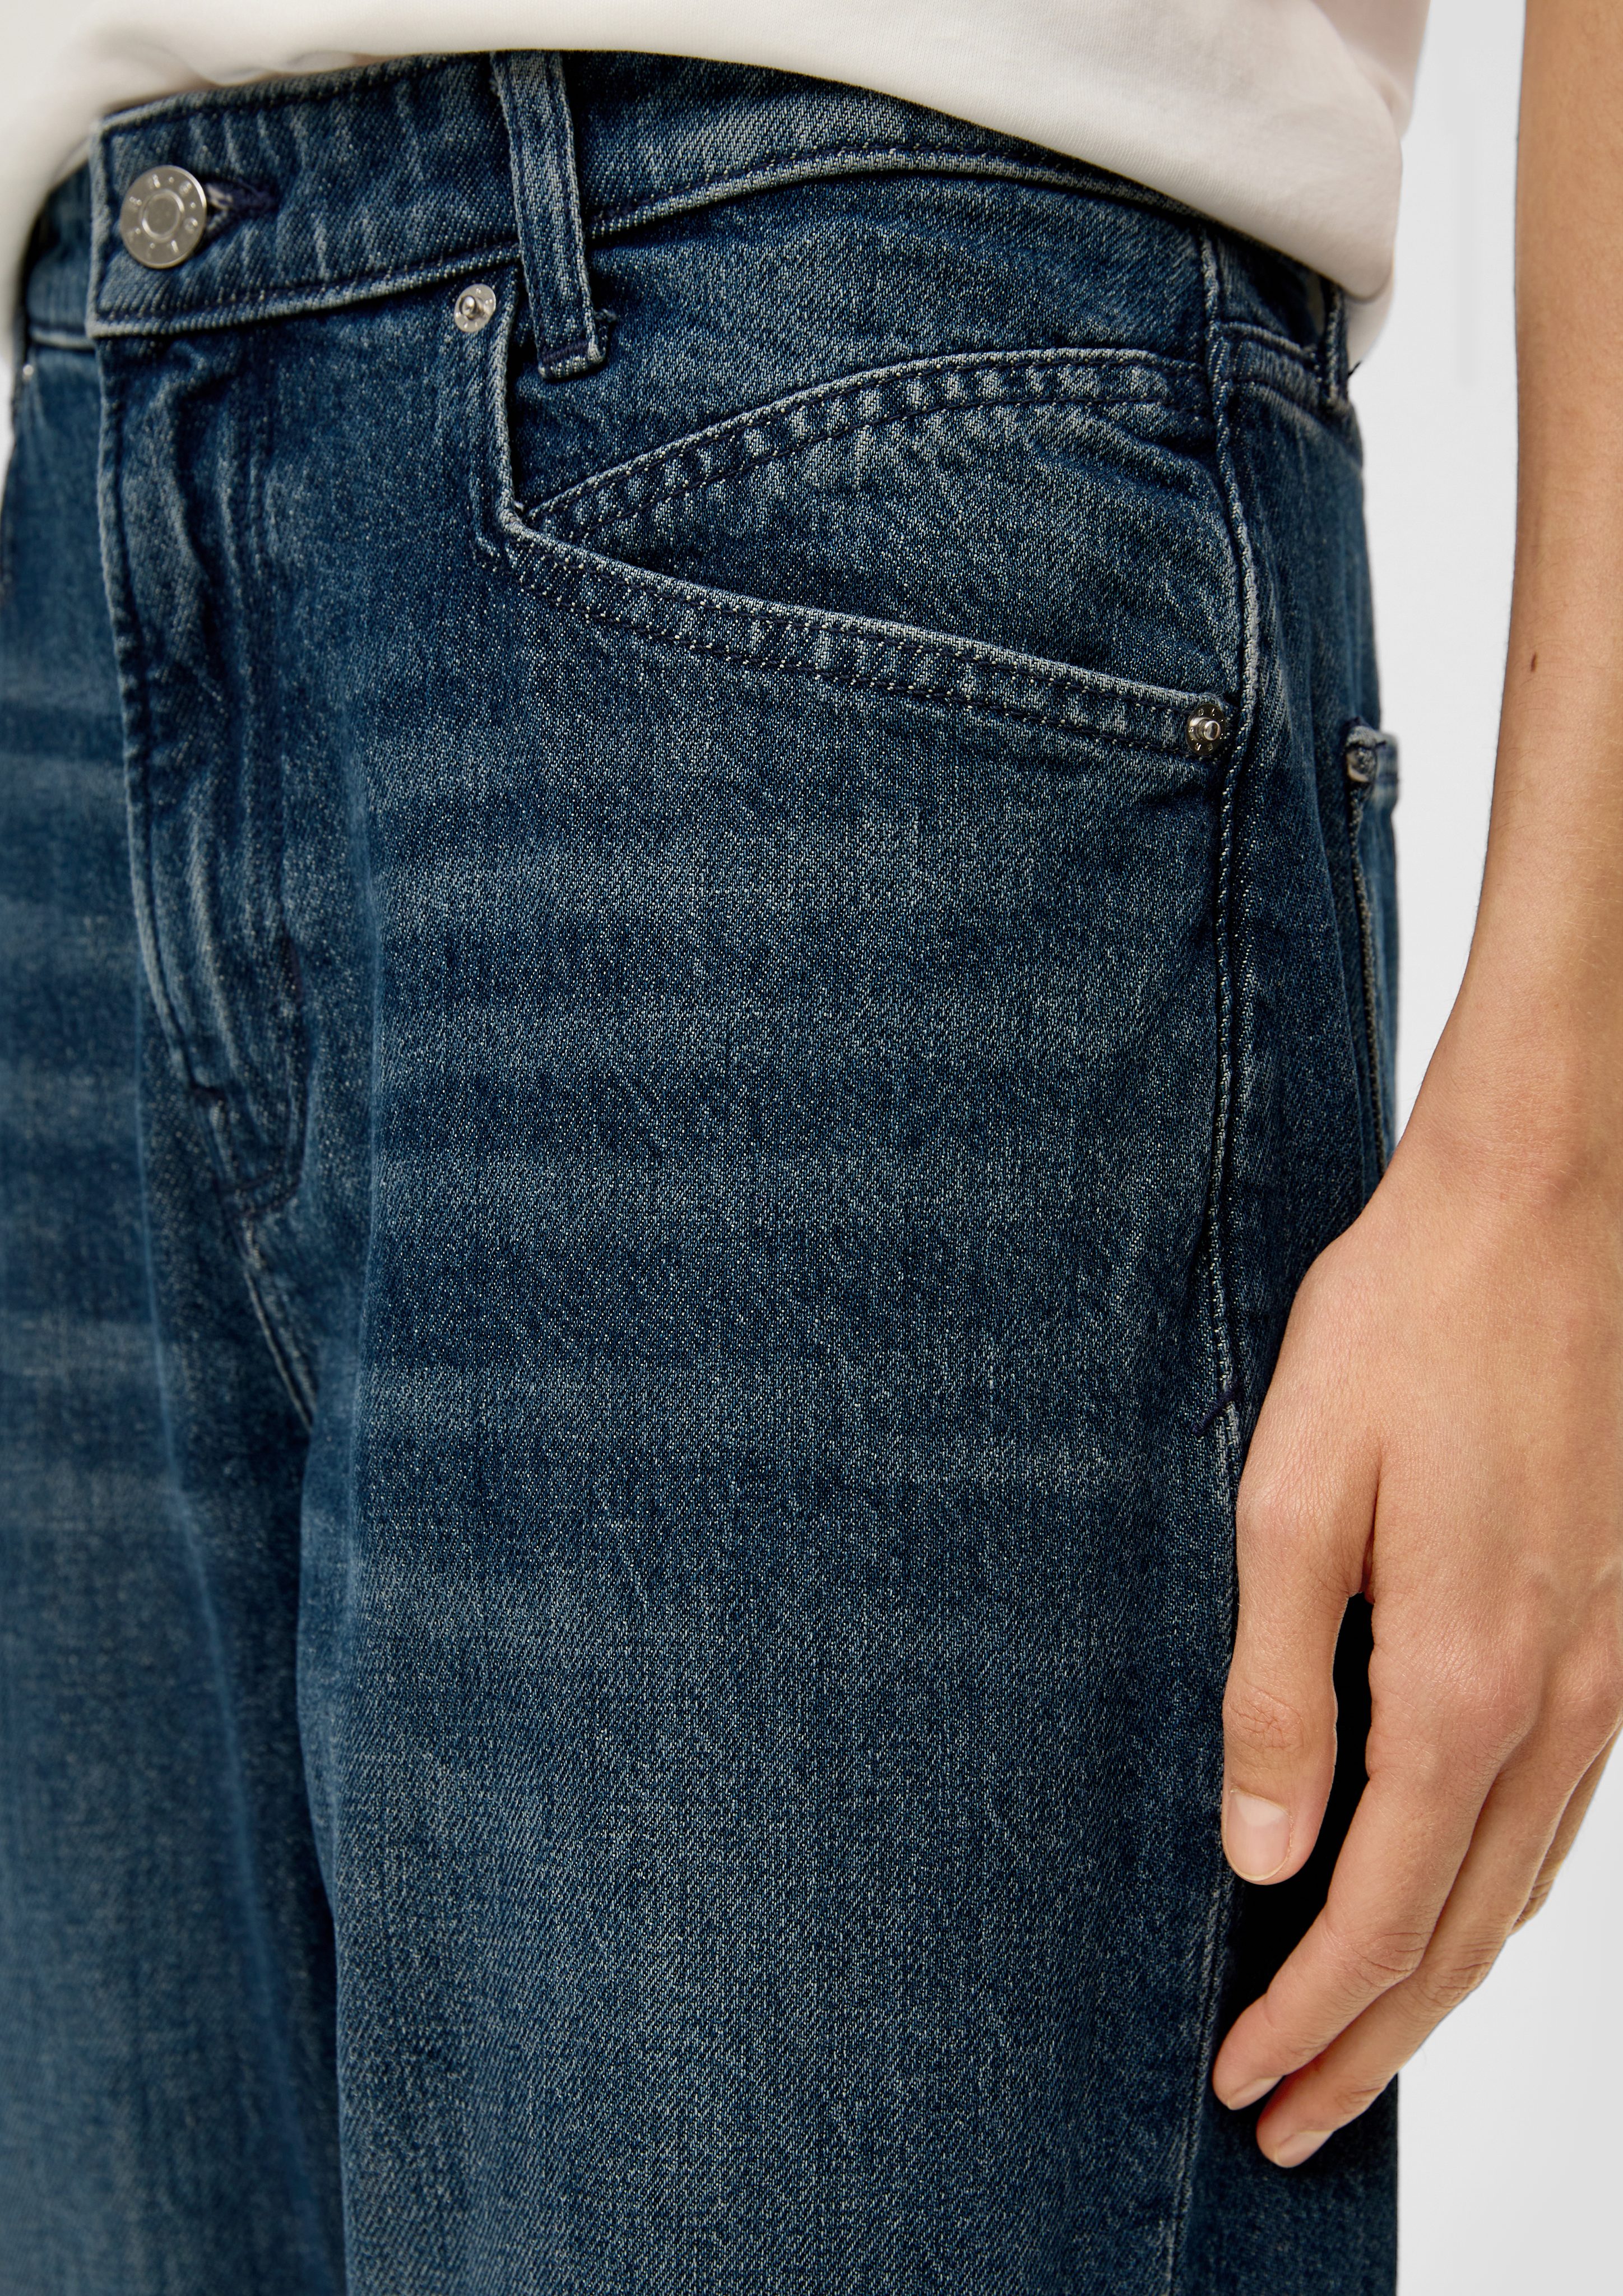 Mid Tapered / / Rise Ankle-Jeans s.Oliver / Franciz Relaxed Fit Leg Waschung, 7/8-Jeans Label-Patch